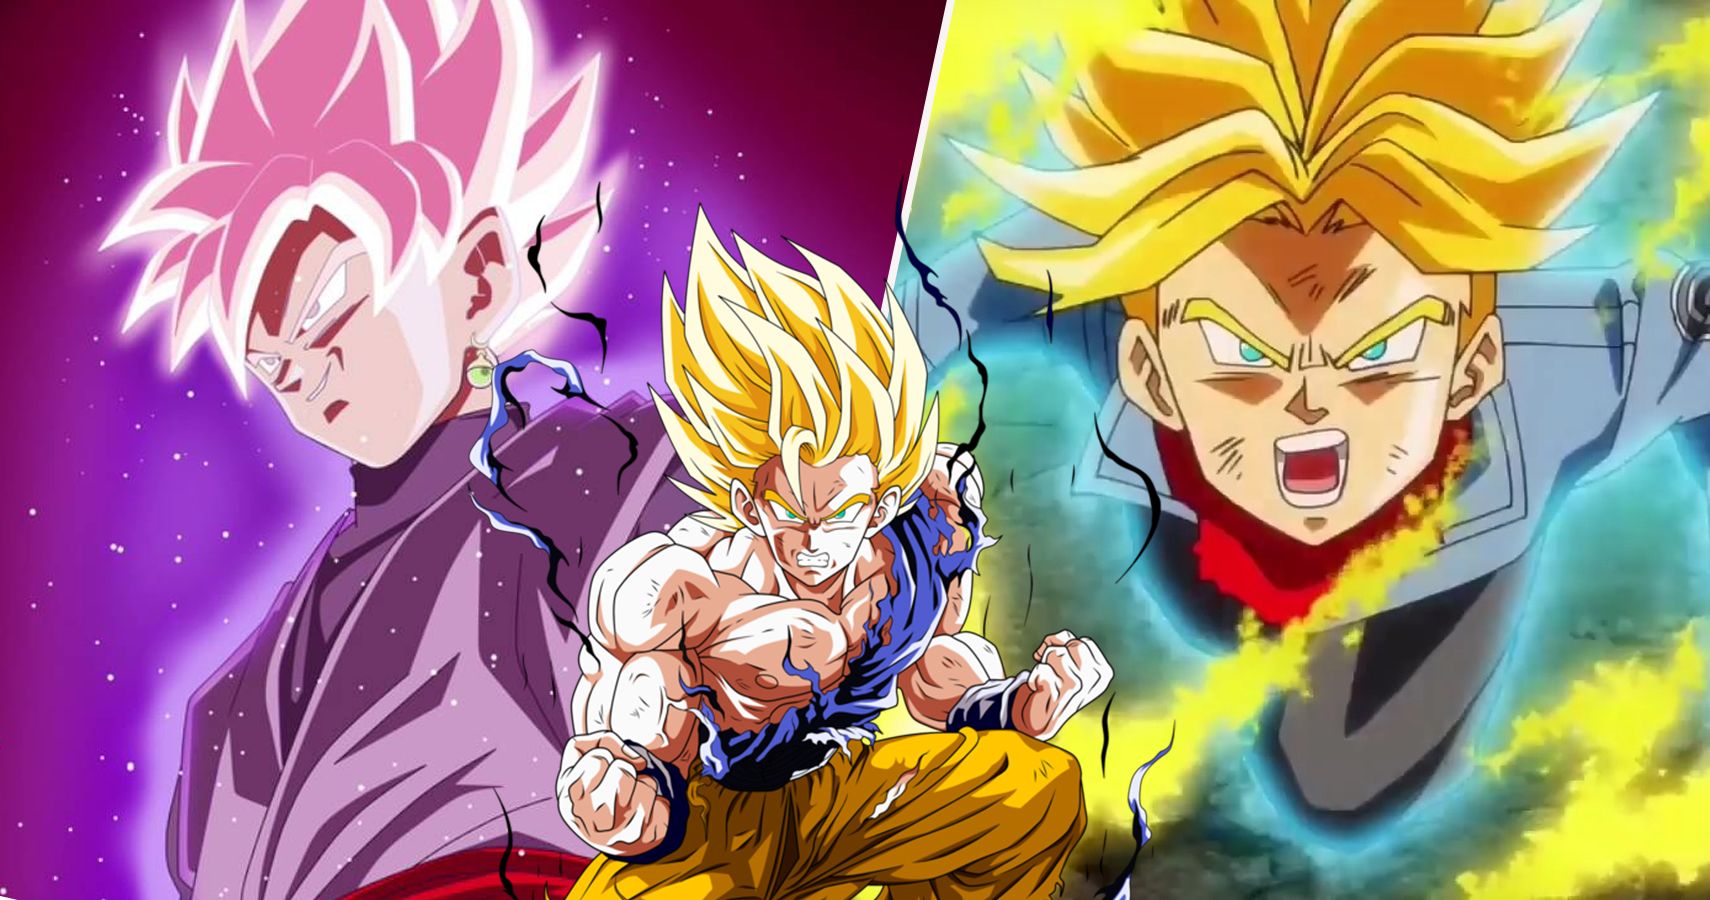 Final Form The 25 Strongest Dragon Ball Transformations Of All Time Officially Ranked - dragon ball z final stand future t o p update roblox best game ever roblox dragon ball dragon ball z